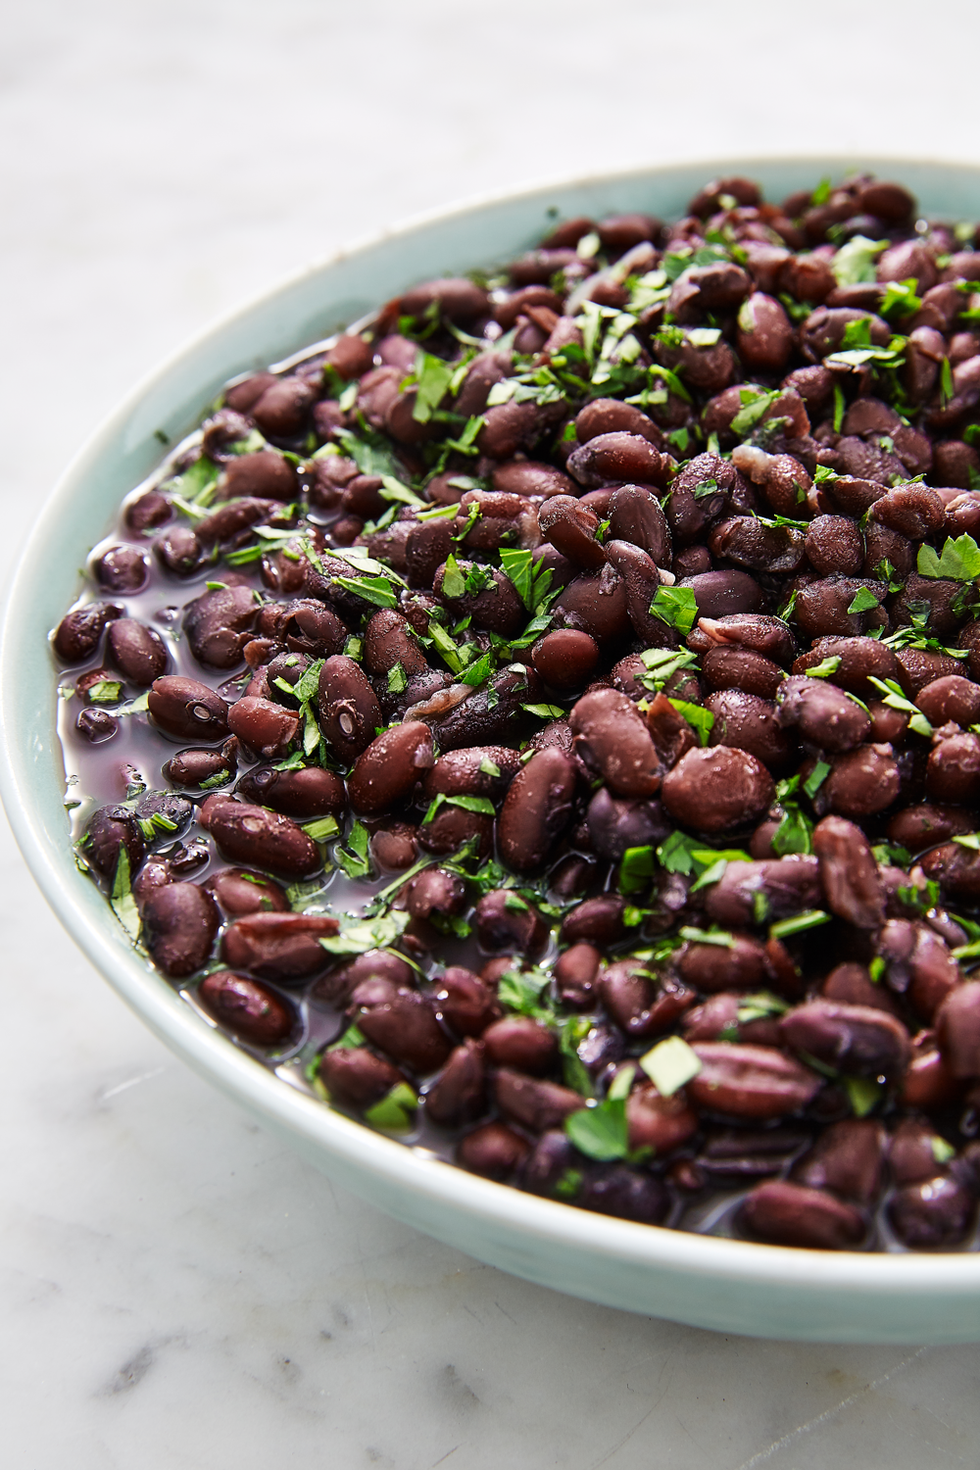 How to Cook Black Beans - Easy Recipe to Soak & Cook Dried Black Beans